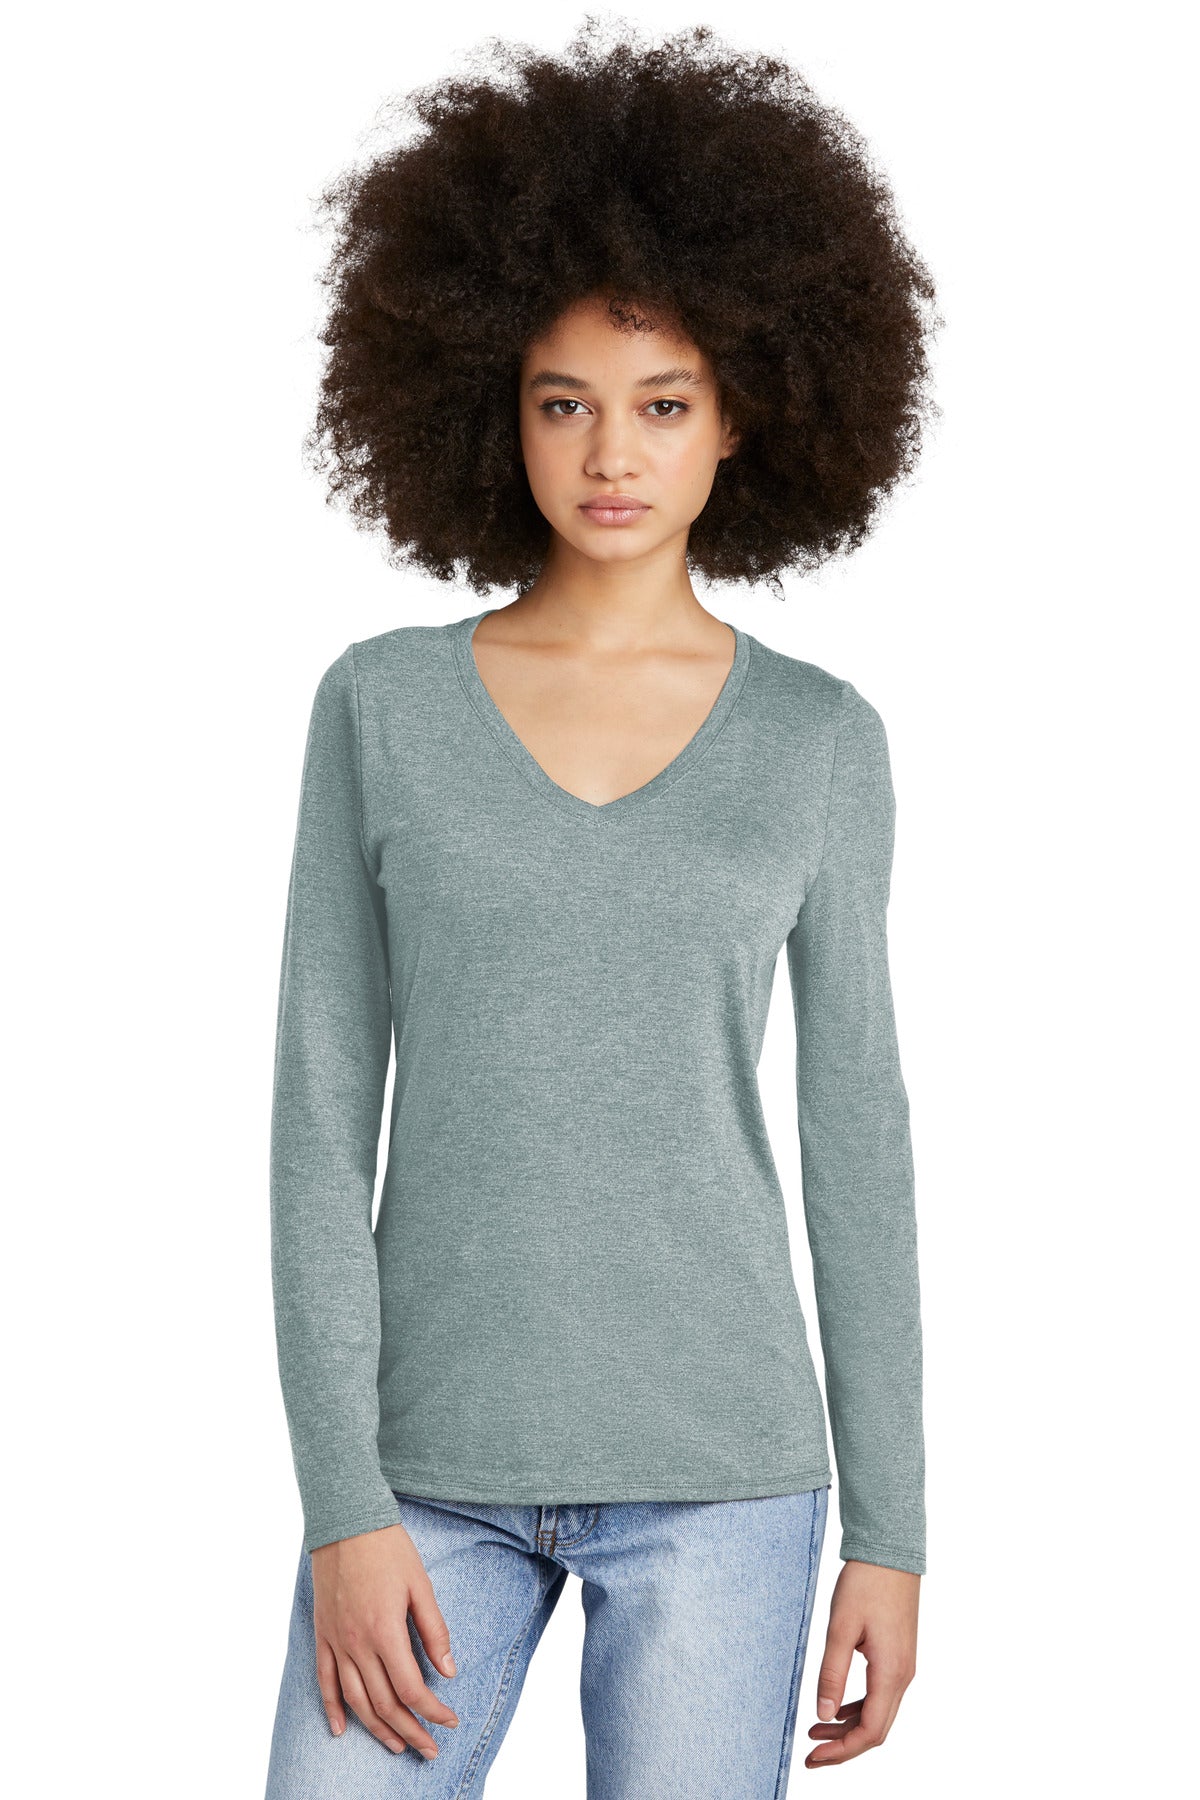 District® Women's Perfect Tri® Long Sleeve V-Neck Tee DT135